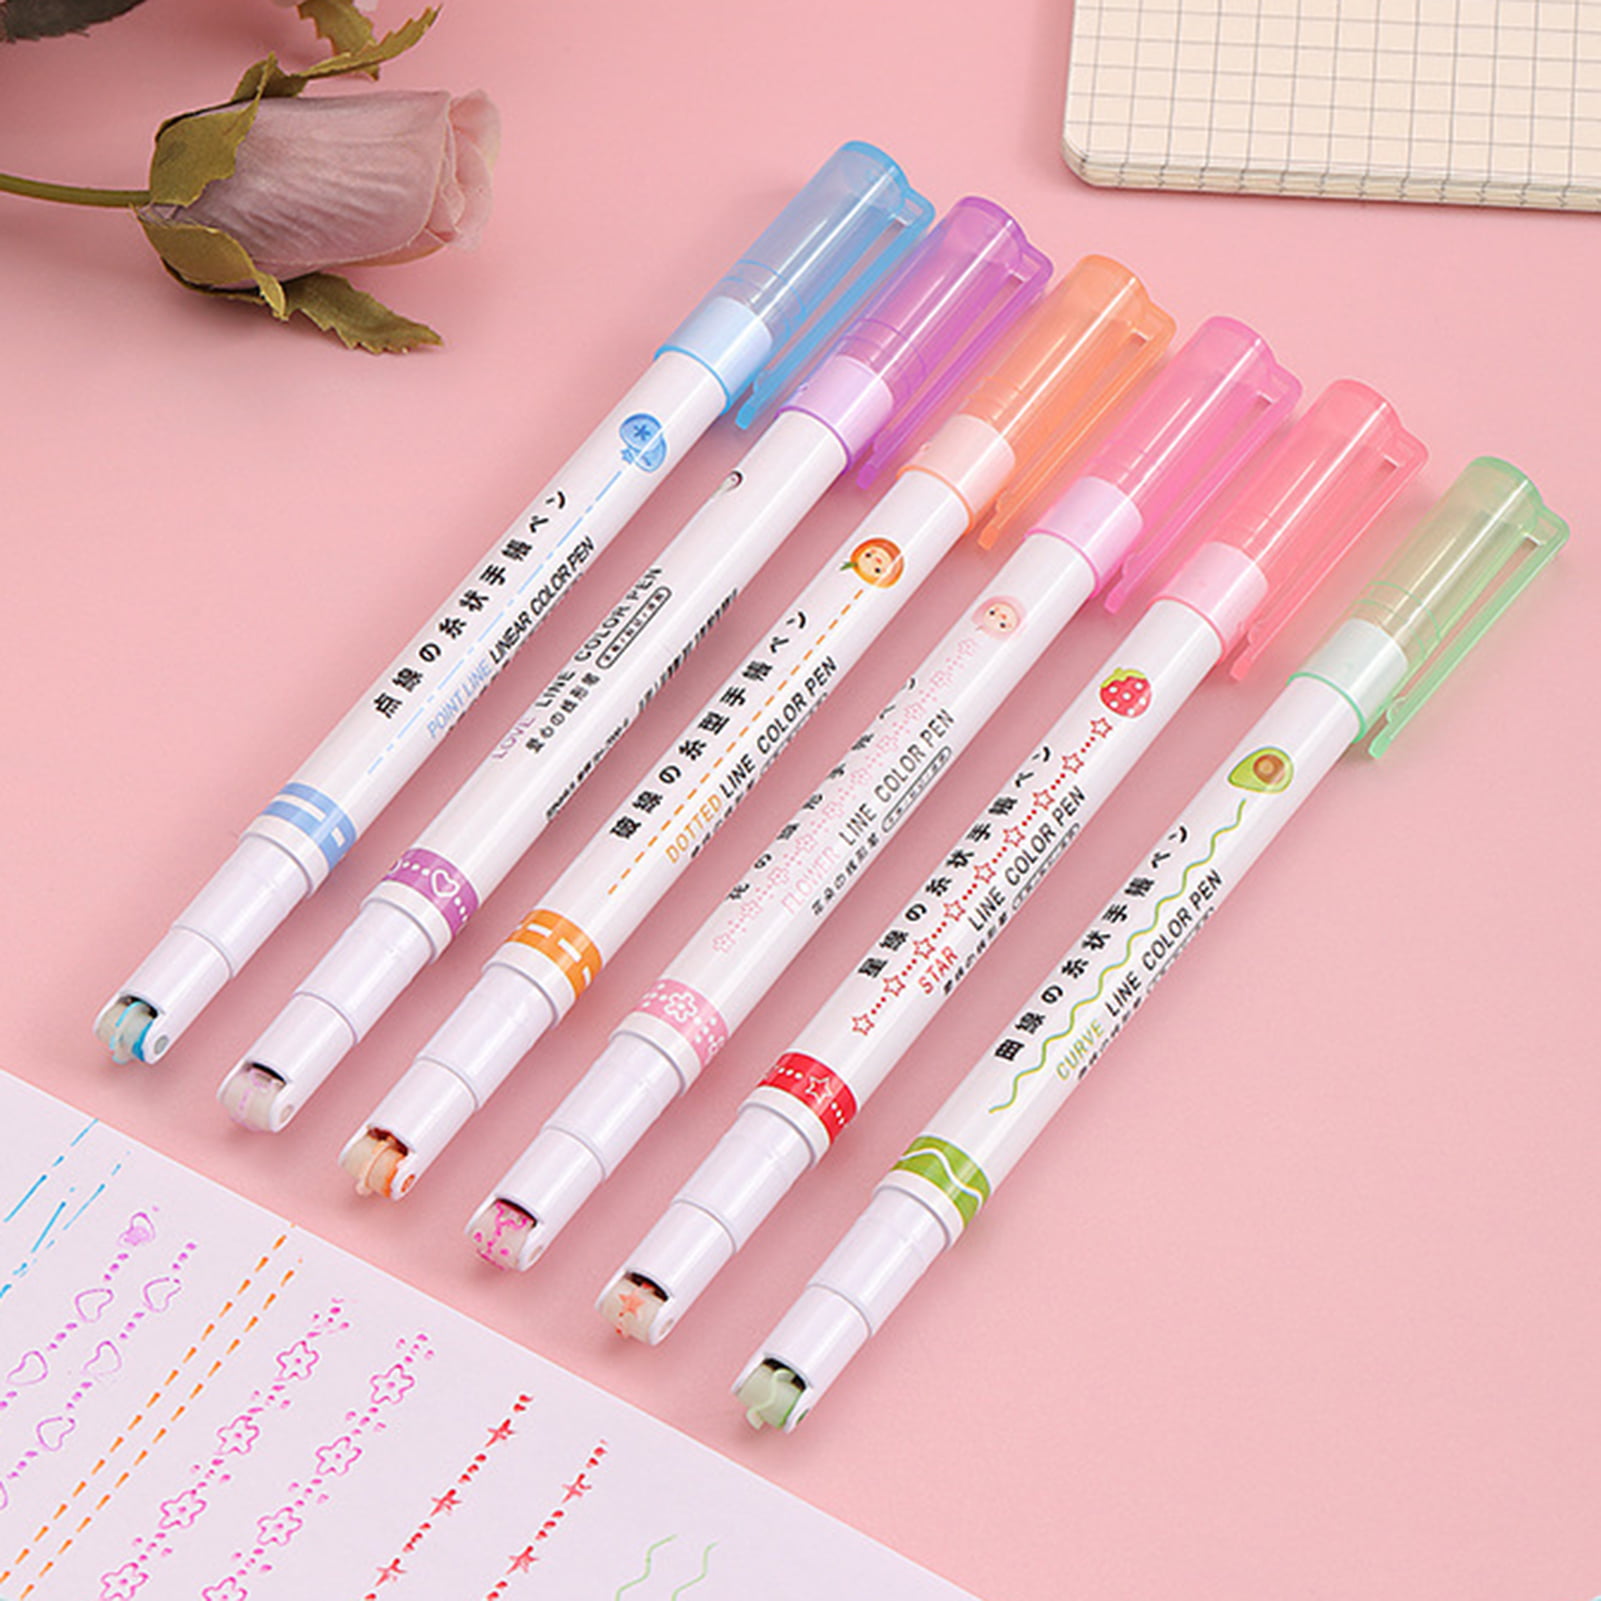 Butory Colored Curve Pens Dual Tip Markers with 6 Different Curve Shapes & 8 Colors Fine Lines for Teenage Kids Writing Journaling Drawing Scrapbook